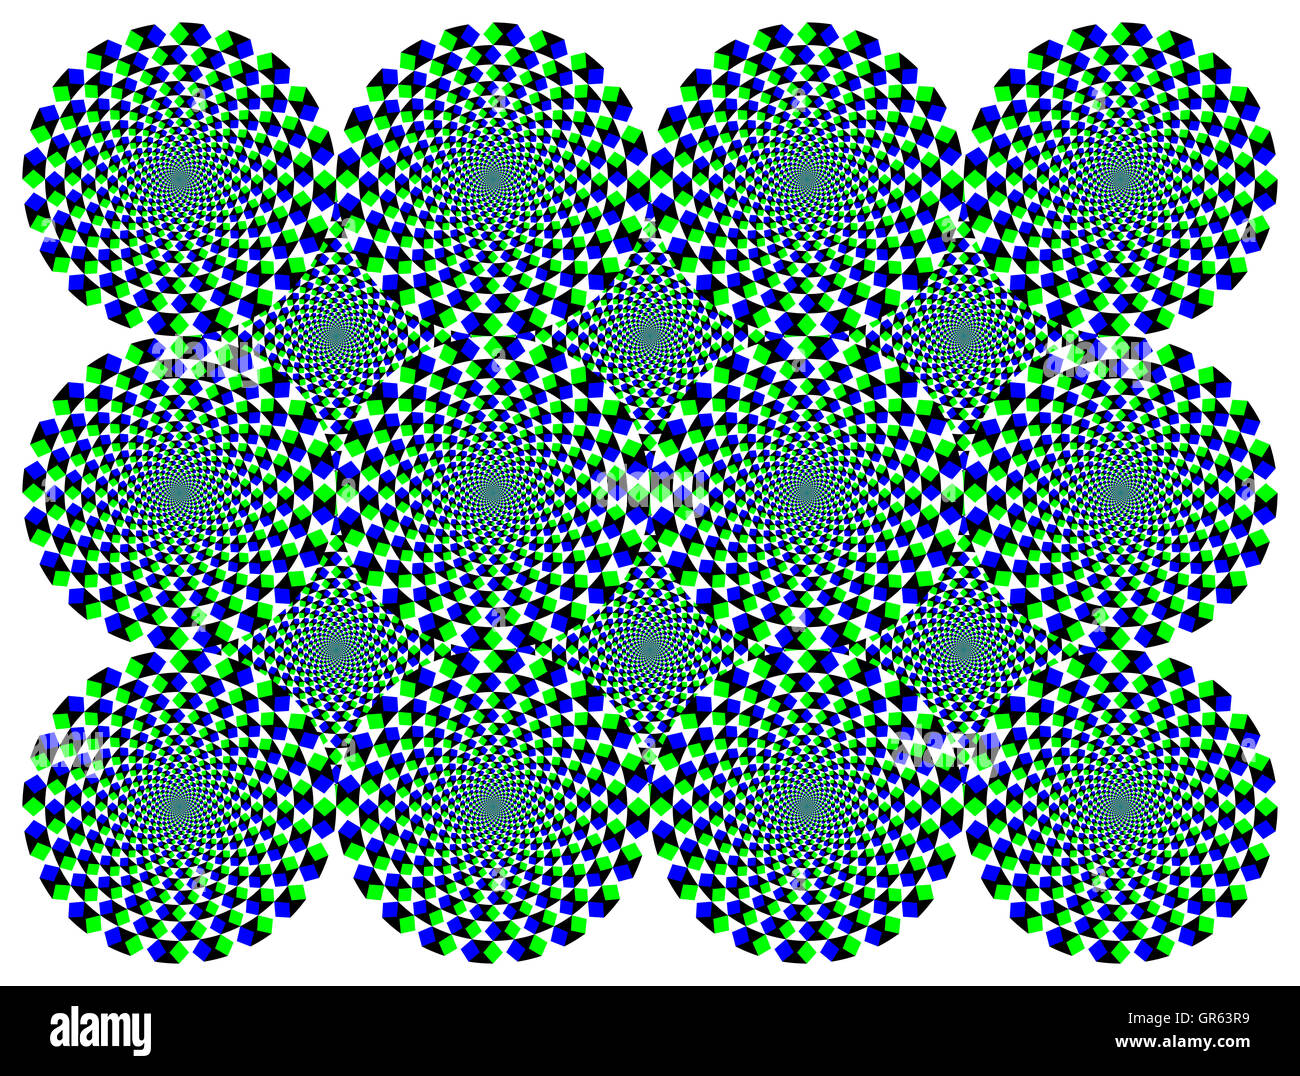 Rotating diamond wheels motion illusion. The wheels with blue and green diamonds seem to move clockwise when moving the eyes. Stock Photo